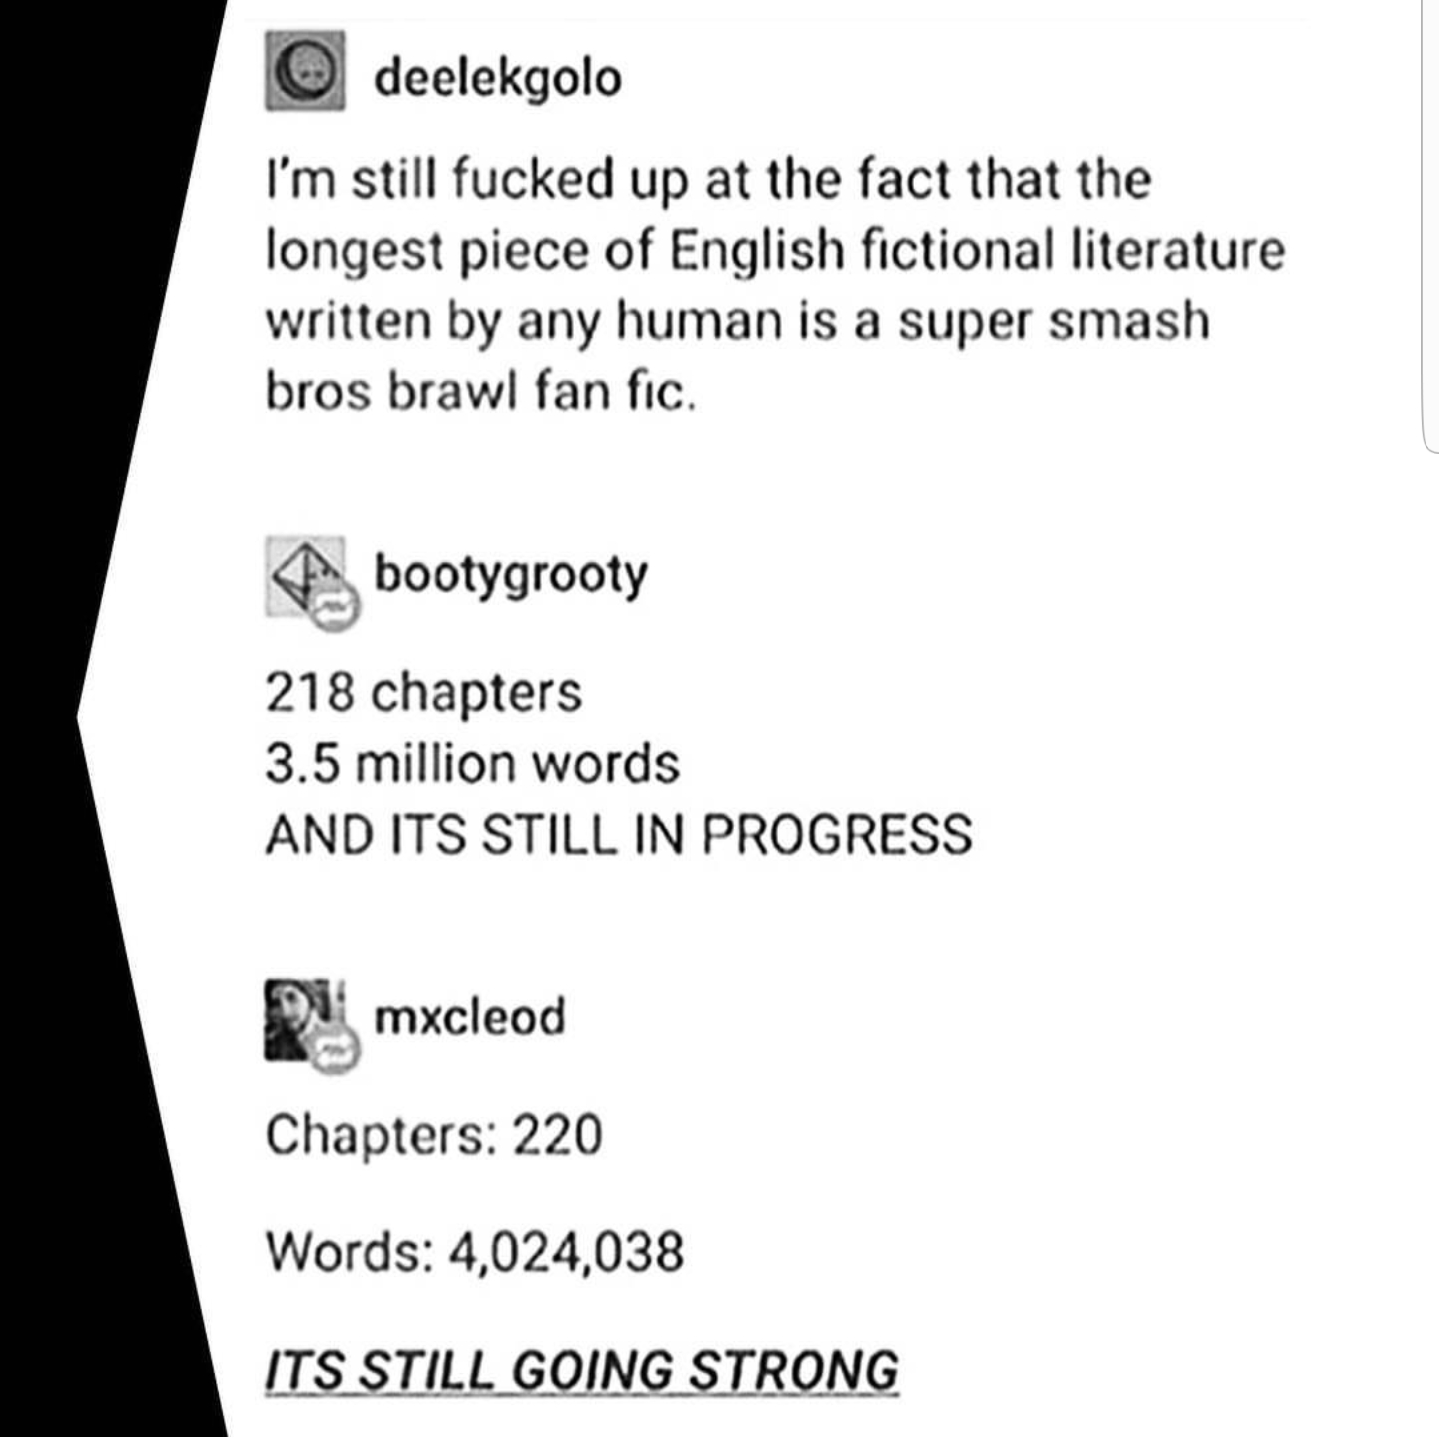 document - deelekgolo I'm still fucked up at the fact that the longest piece of English fictional literature written by any human is a super smash bros brawl fan fic. bootygrooty 218 chapters 3.5 million words And Its Still In Progress Pmxcleod Chapters 2